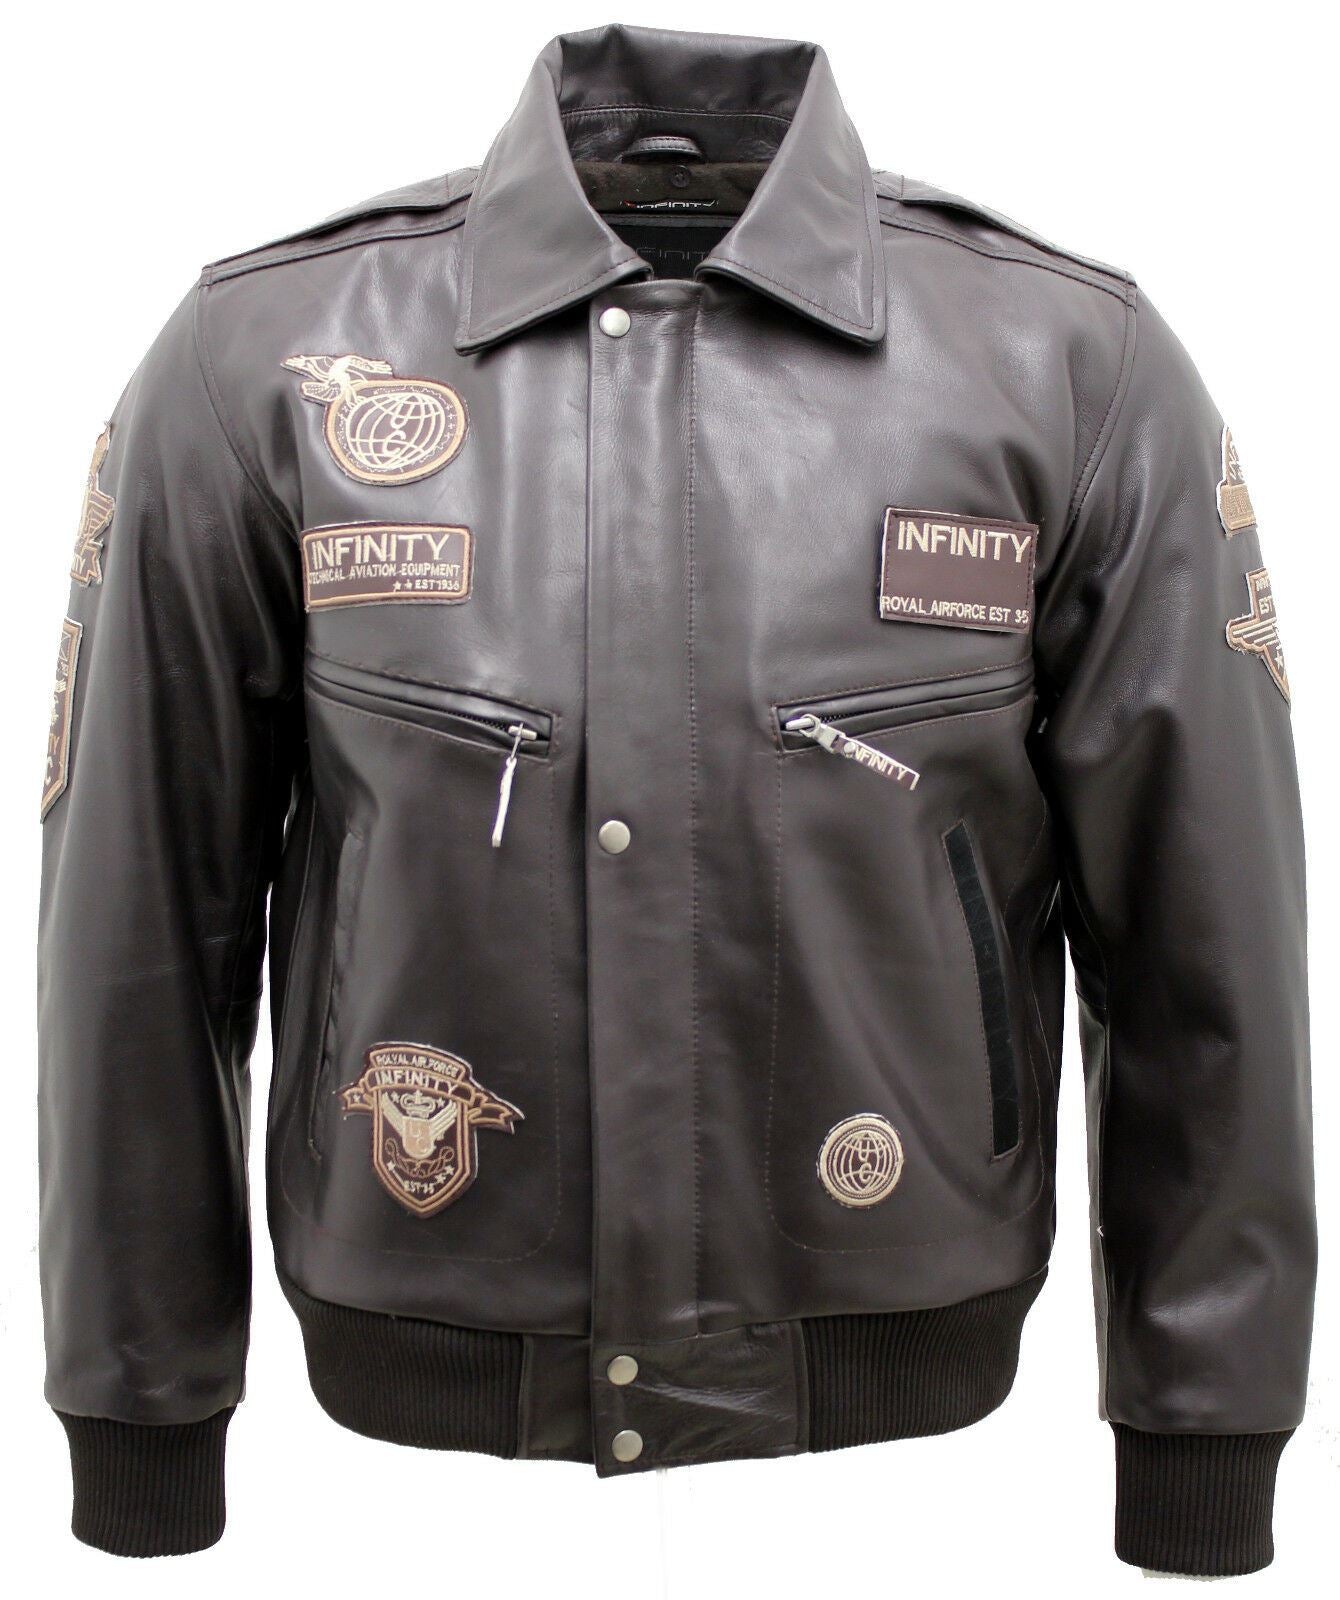 Mens US Badged Air Force Bomber Jacket-Clare - Upperclass Fashions 